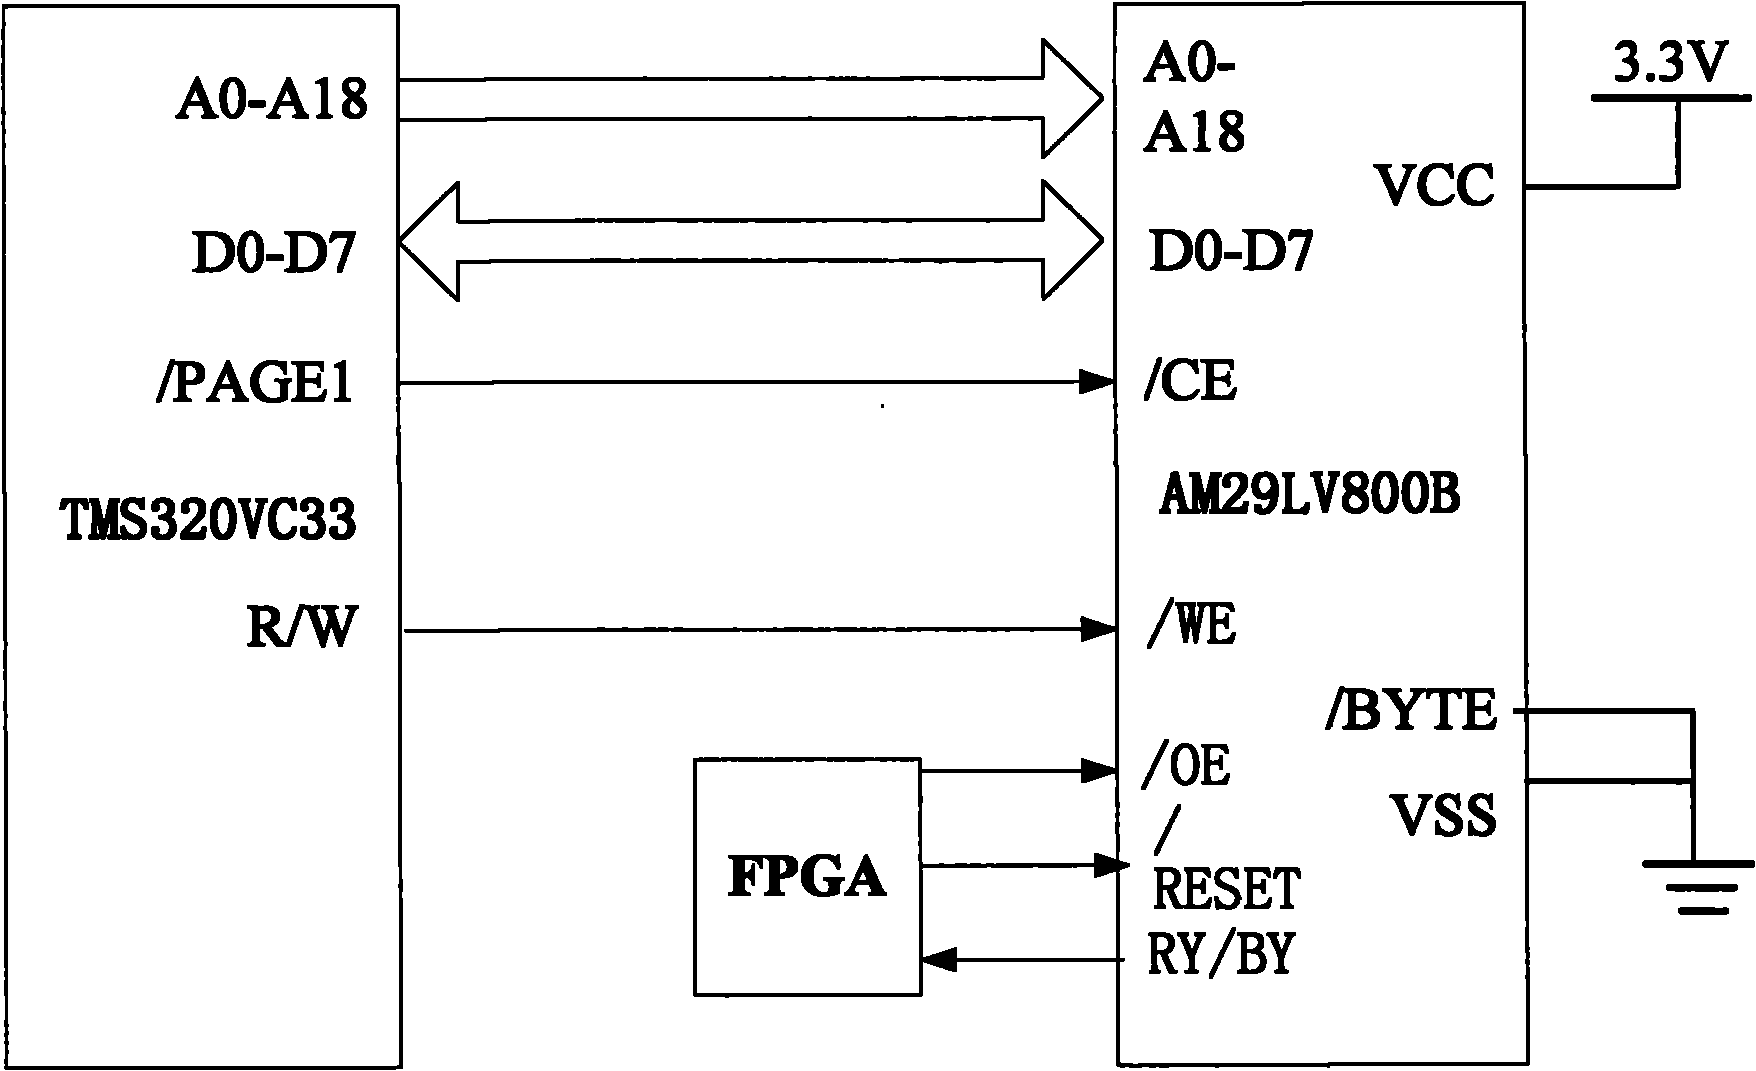 Strapdown attitude and heading reference system (AHRS) based on fiber optic gyro (FOG)